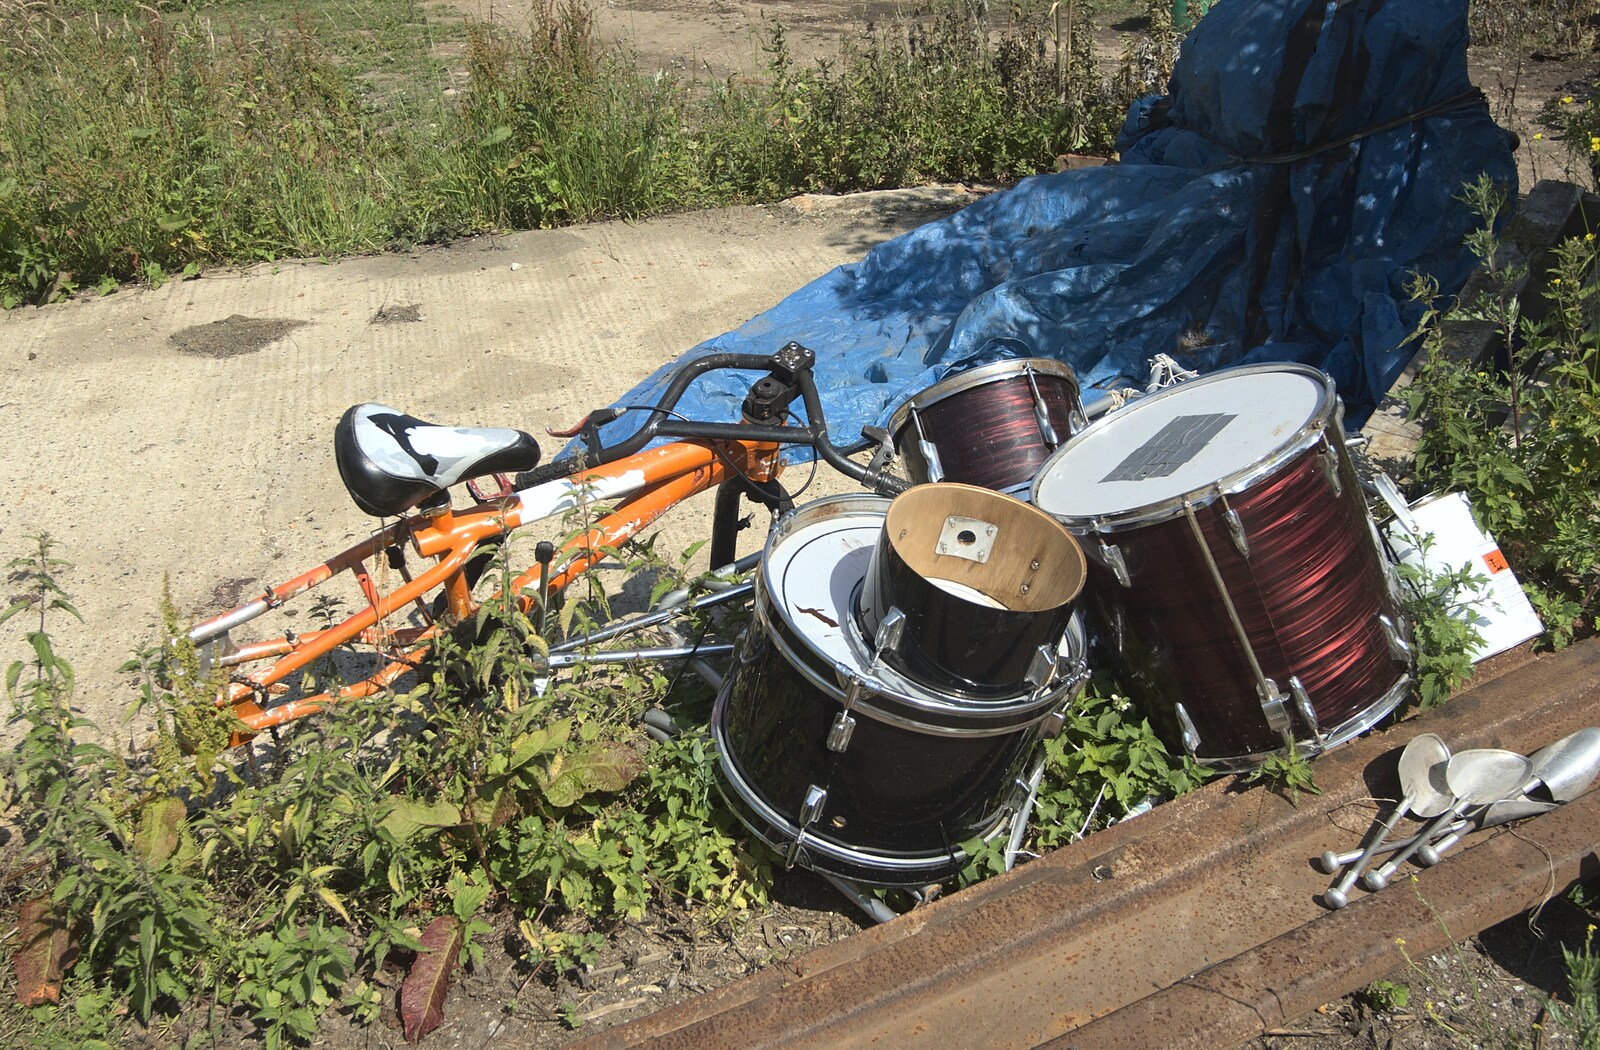 A random discarded drum kit from A Fire at Valley Farm, Thrandeston, Suffolk - 24th June 2009